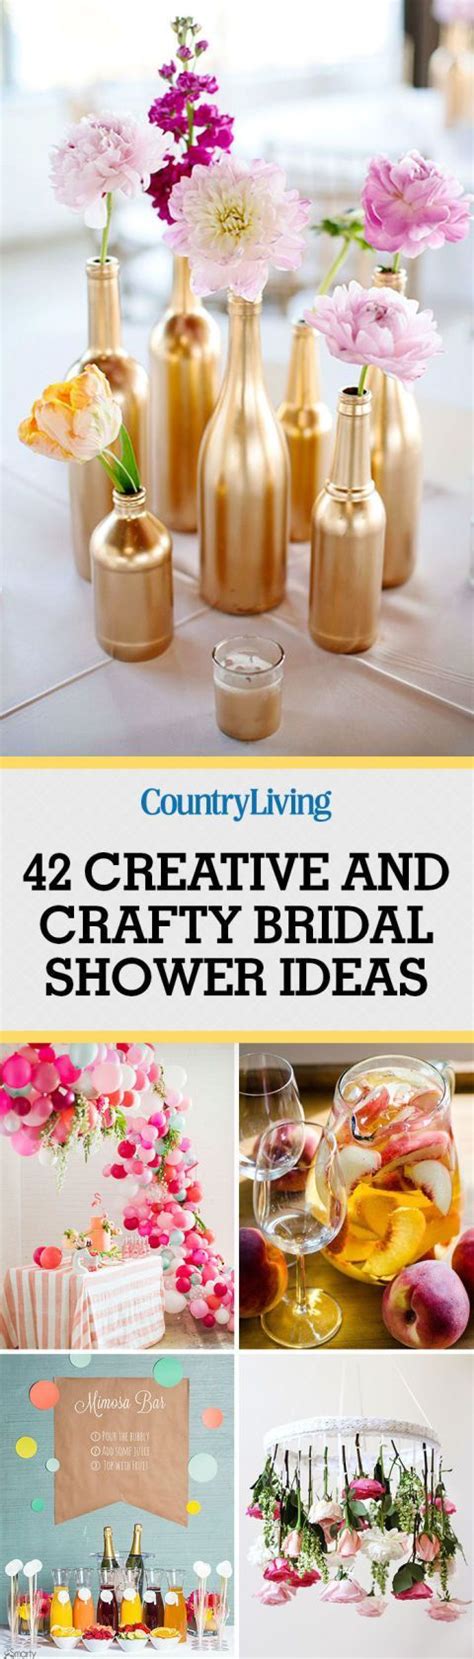 Creative Bridal Shower Ideas Every Kind Of Bride Will Love Bridal